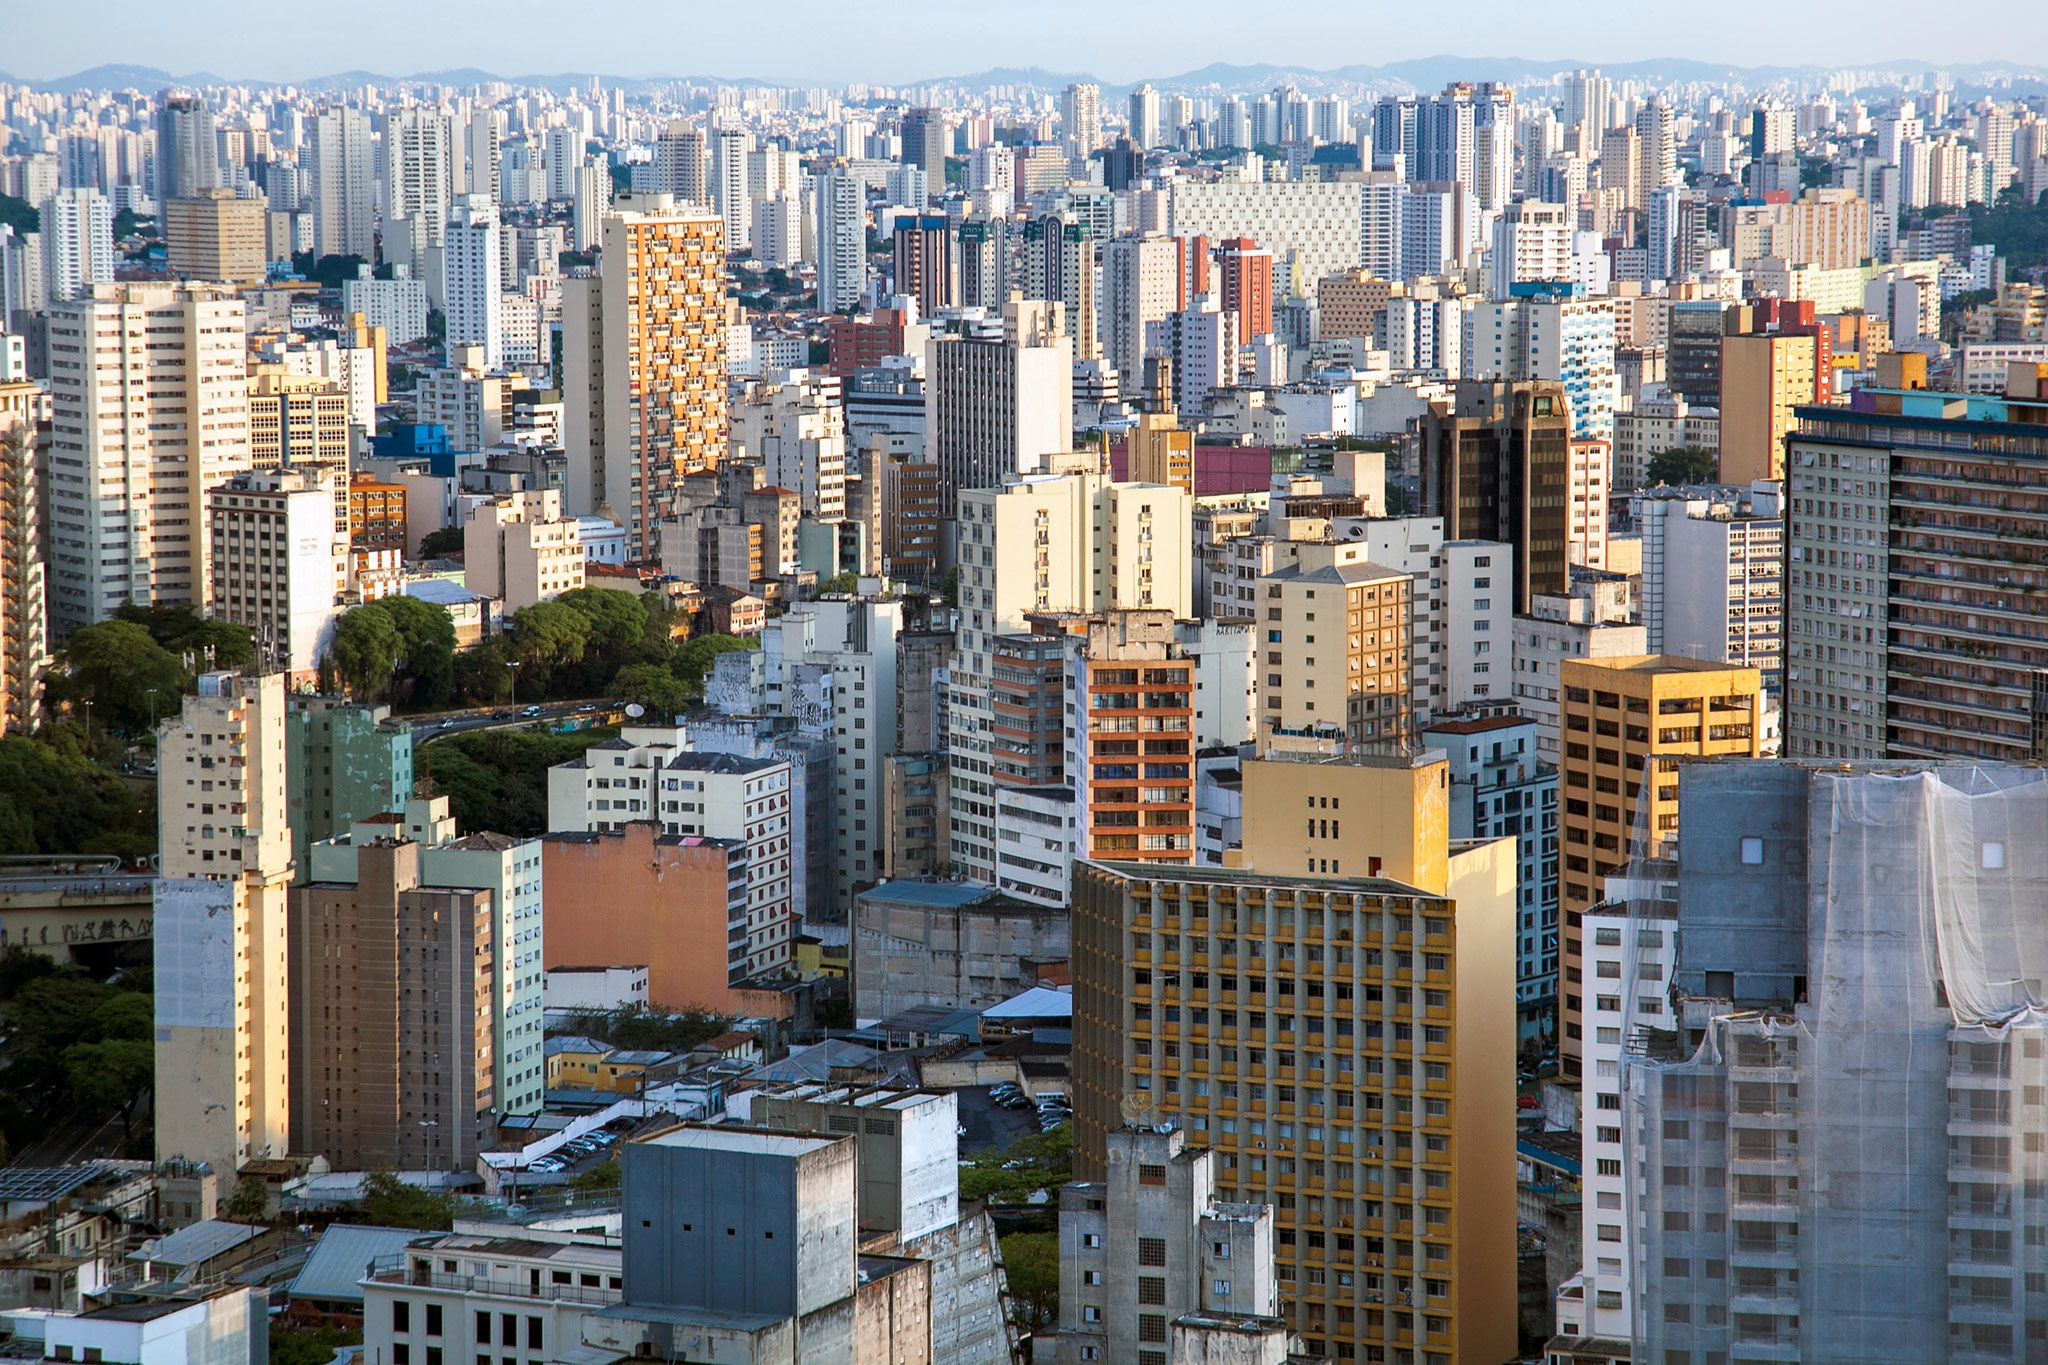 In May 2022, 6,838 new residential units were sold in São Paulo City, 16.2% more than in May 2021.